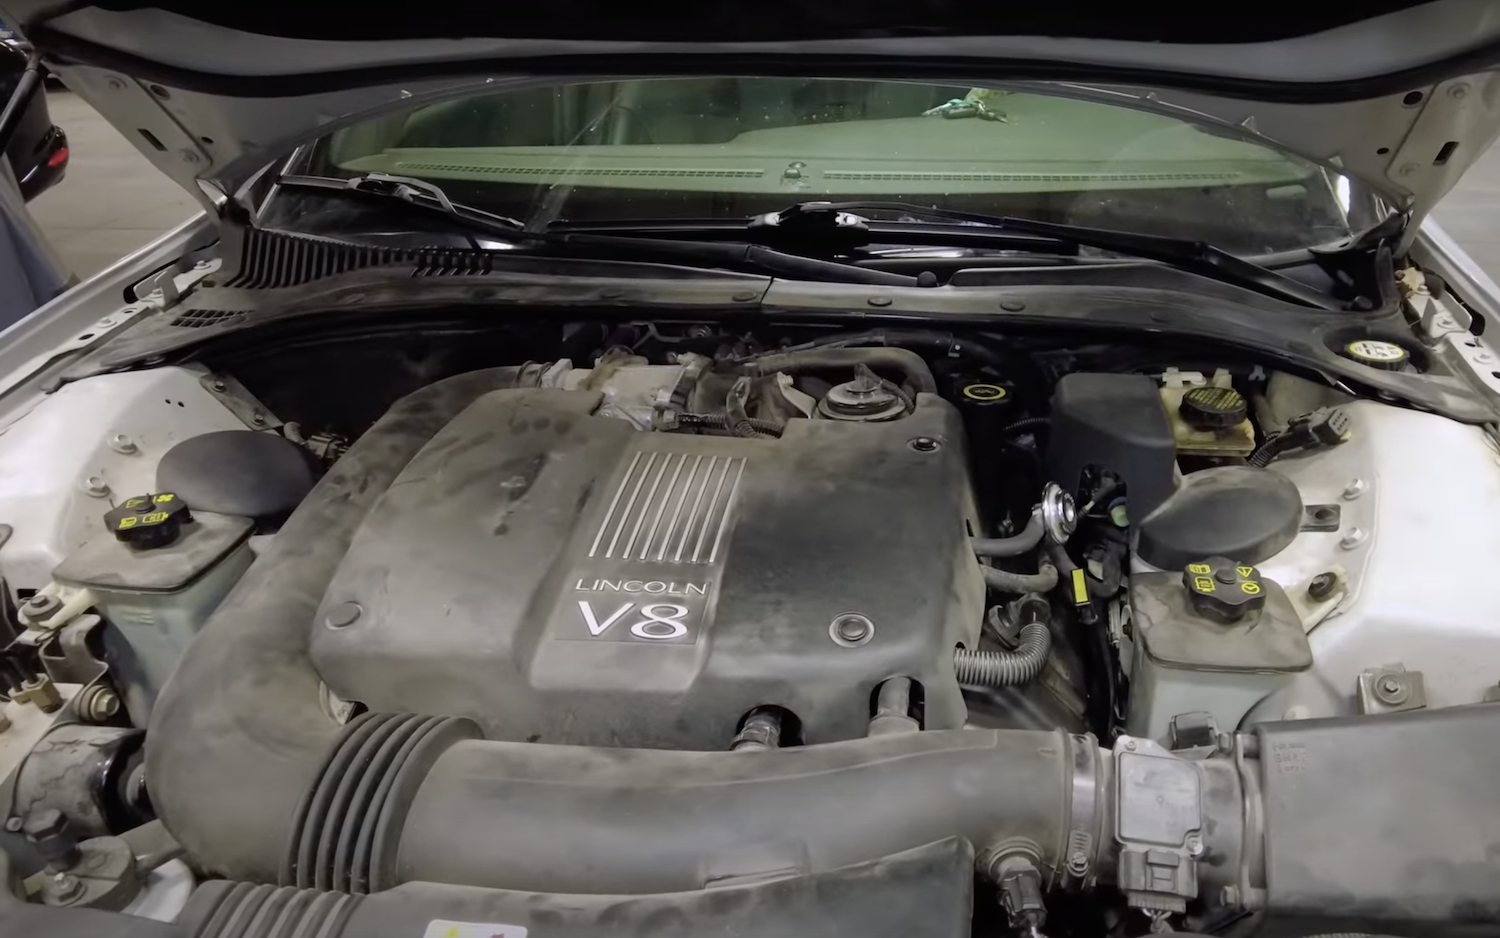 2001 Lincoln LS Can Barely Hide Its European Roots: Video